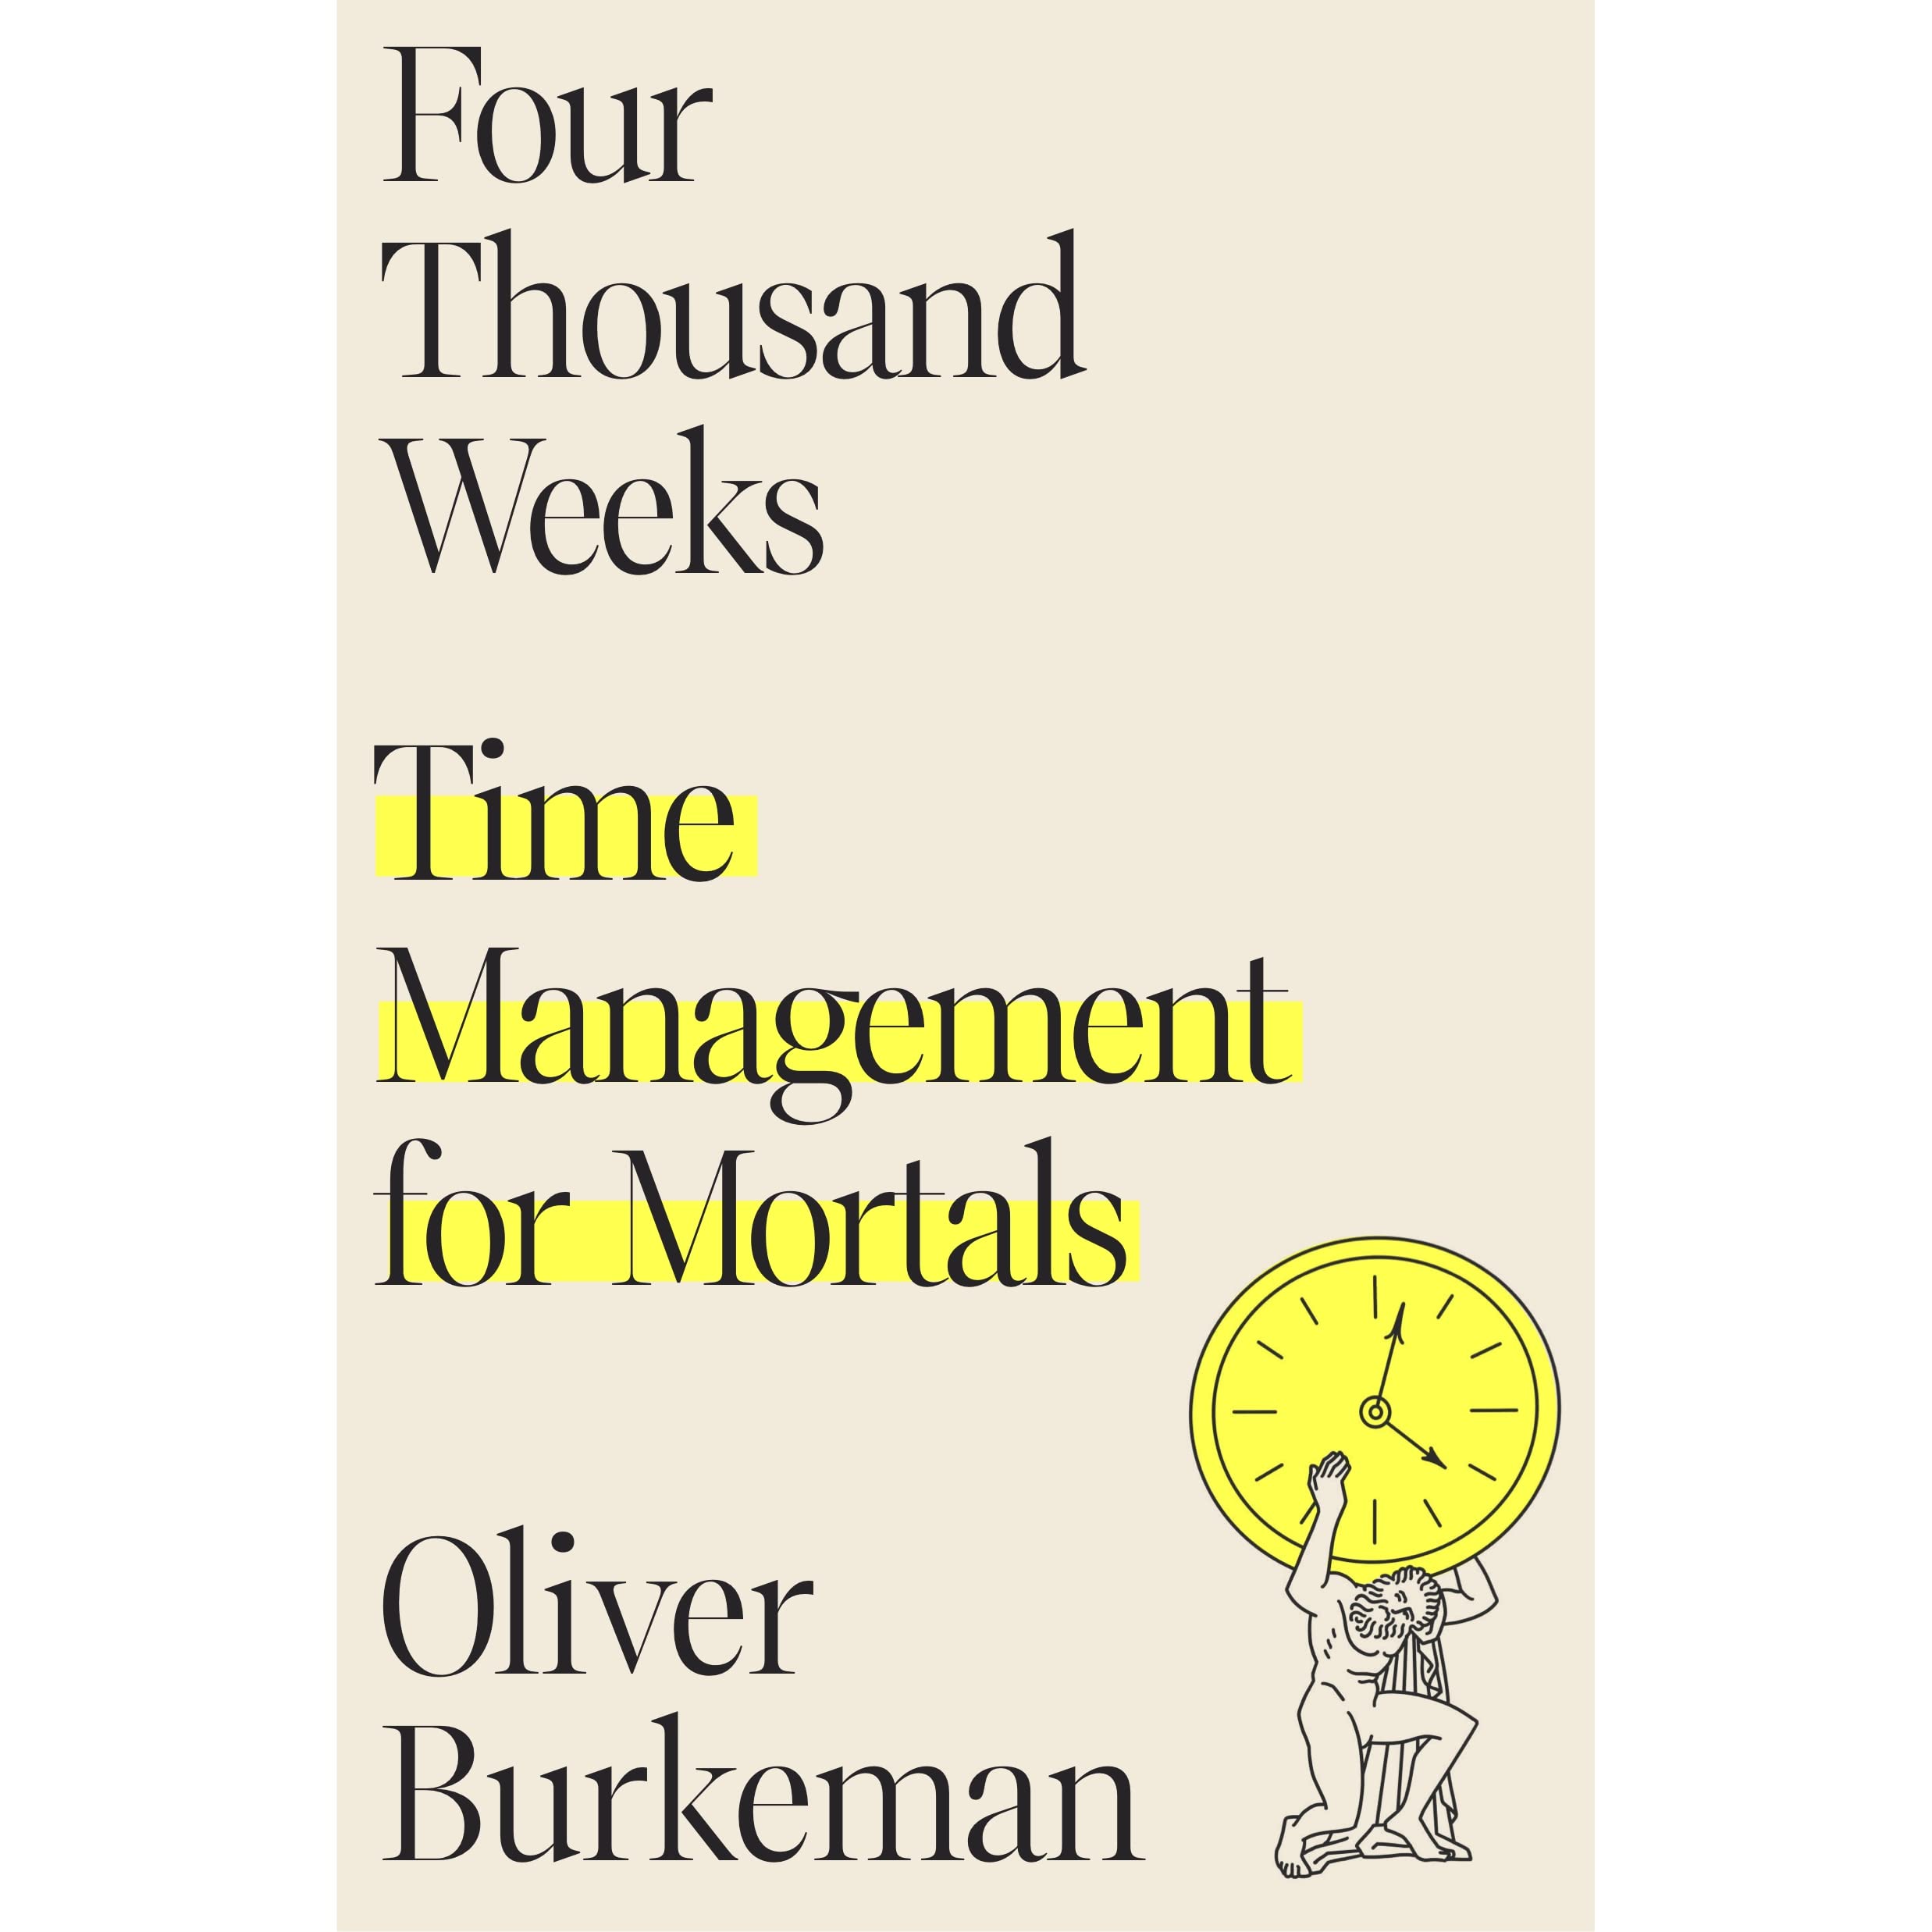 Four Thousand Weeks: Time Management for Mortals by Oliver Burkeman - Book Summary